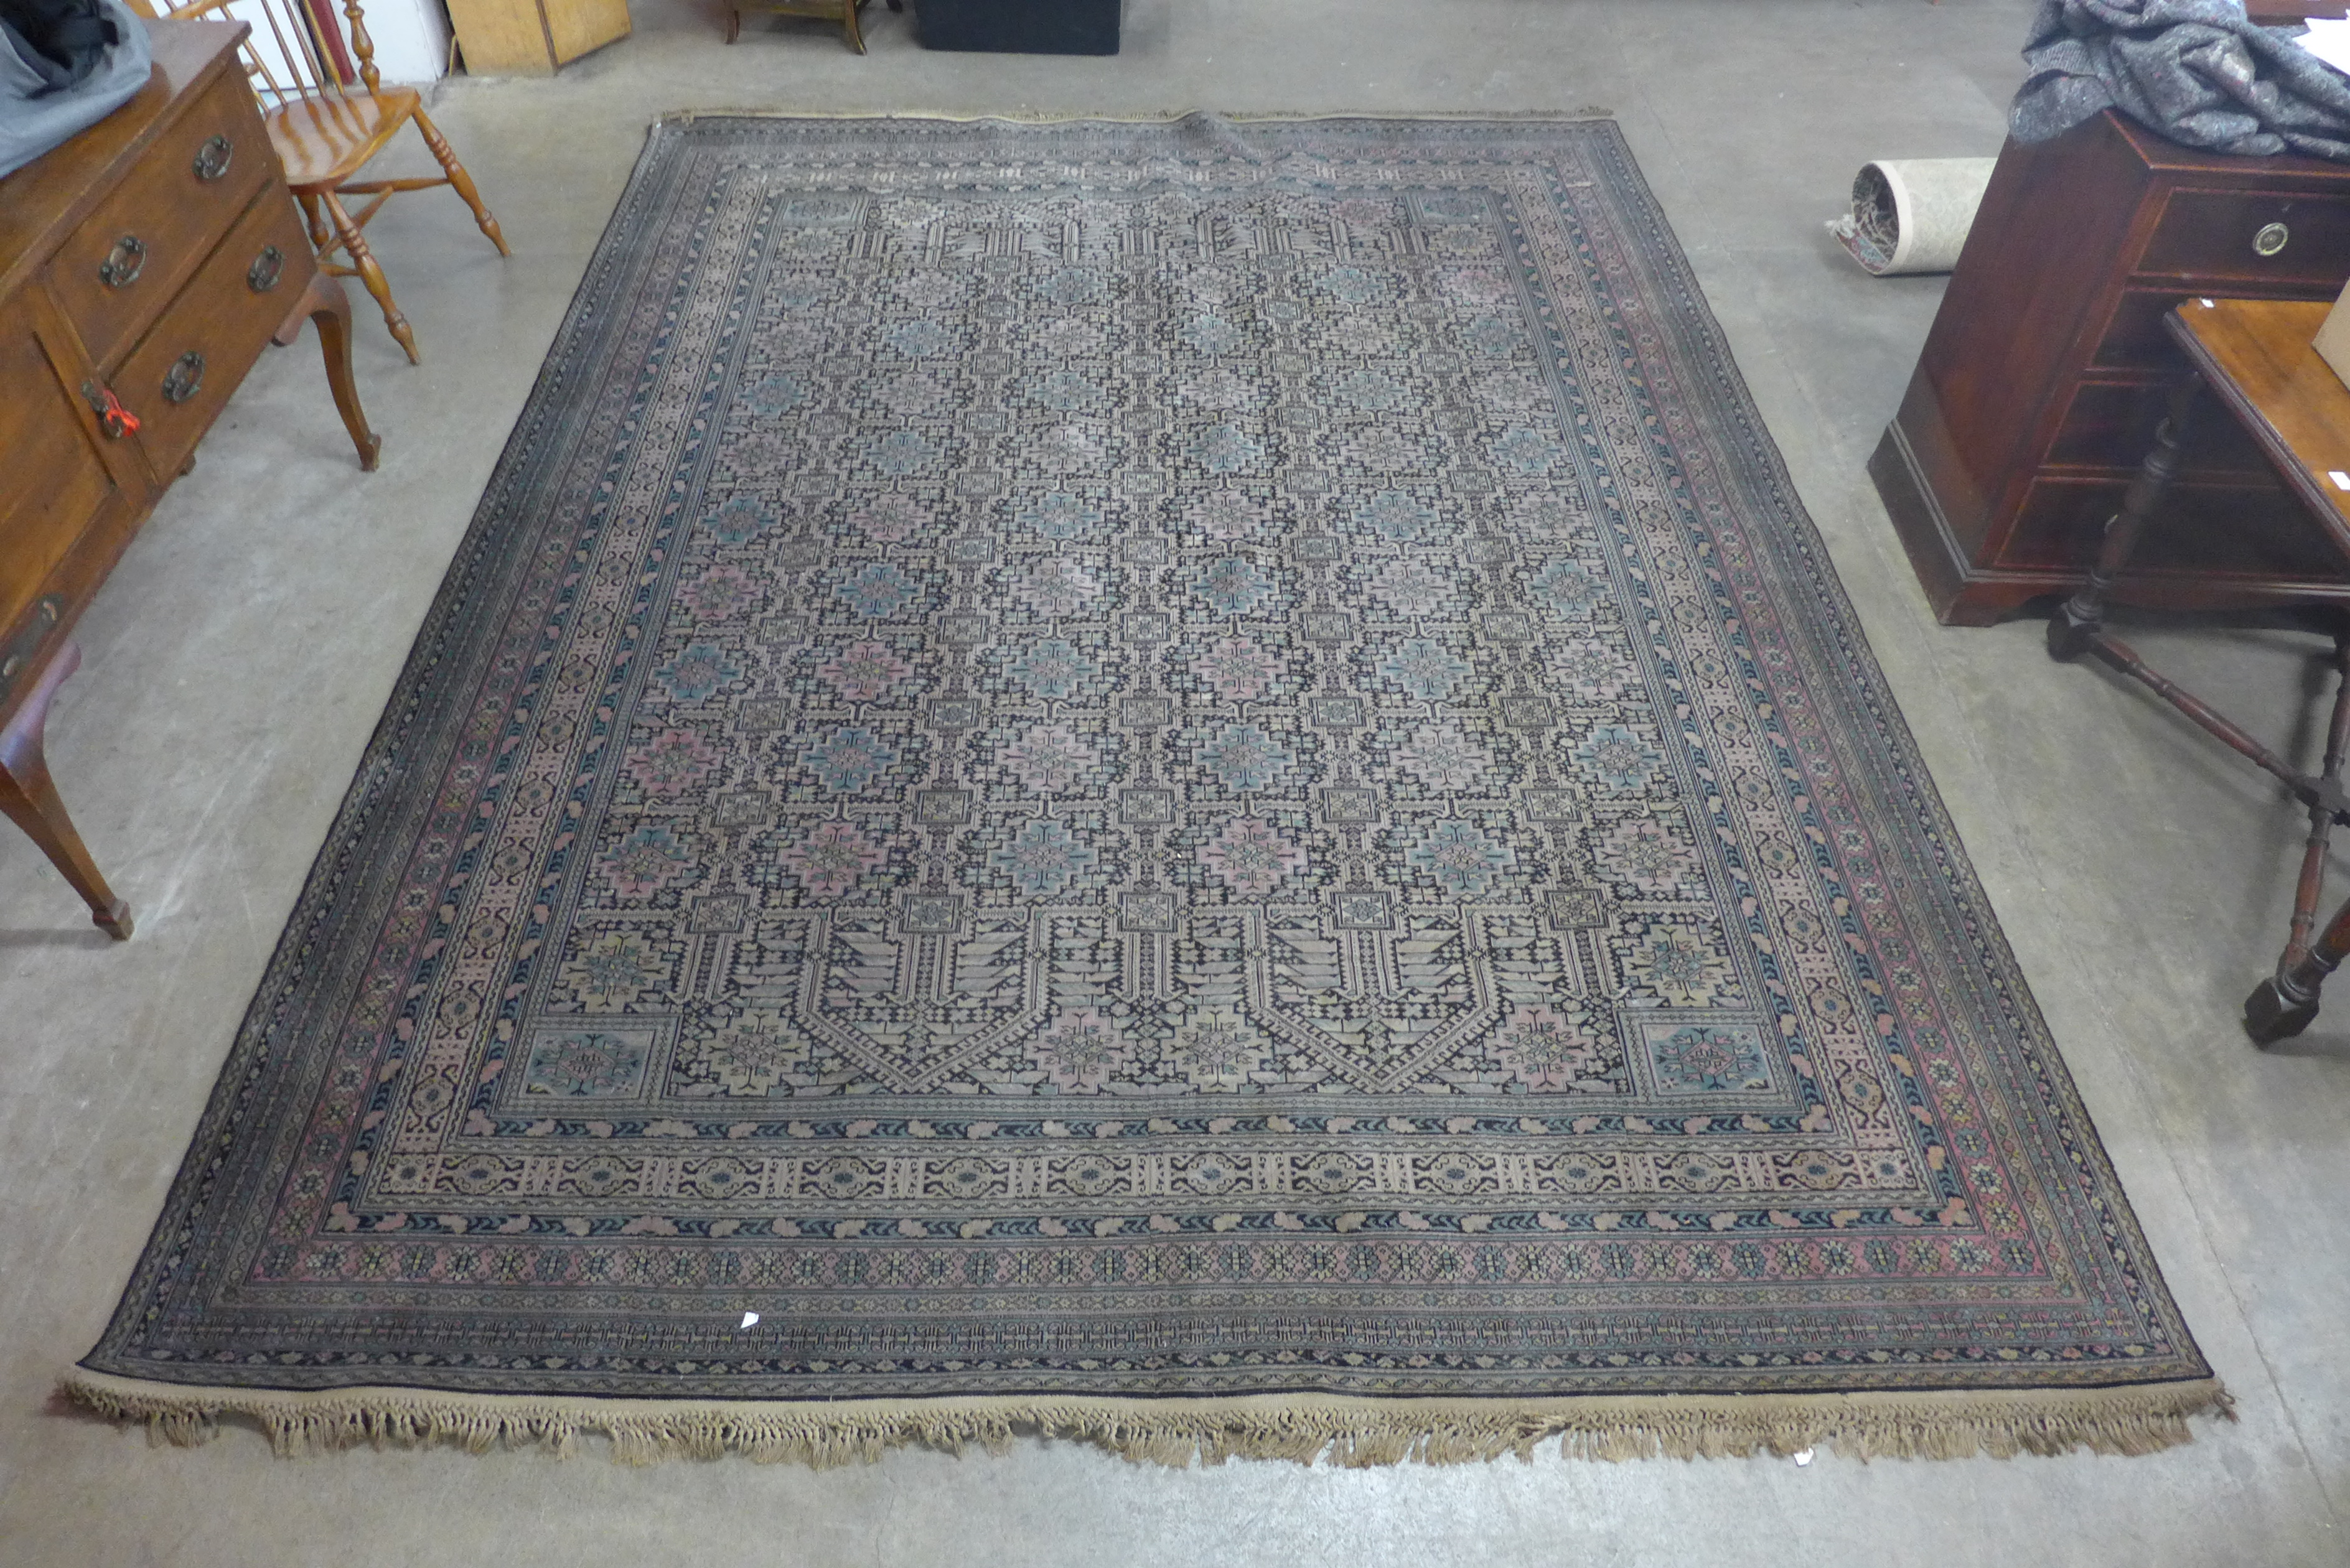 A large blue, red and black ground rug